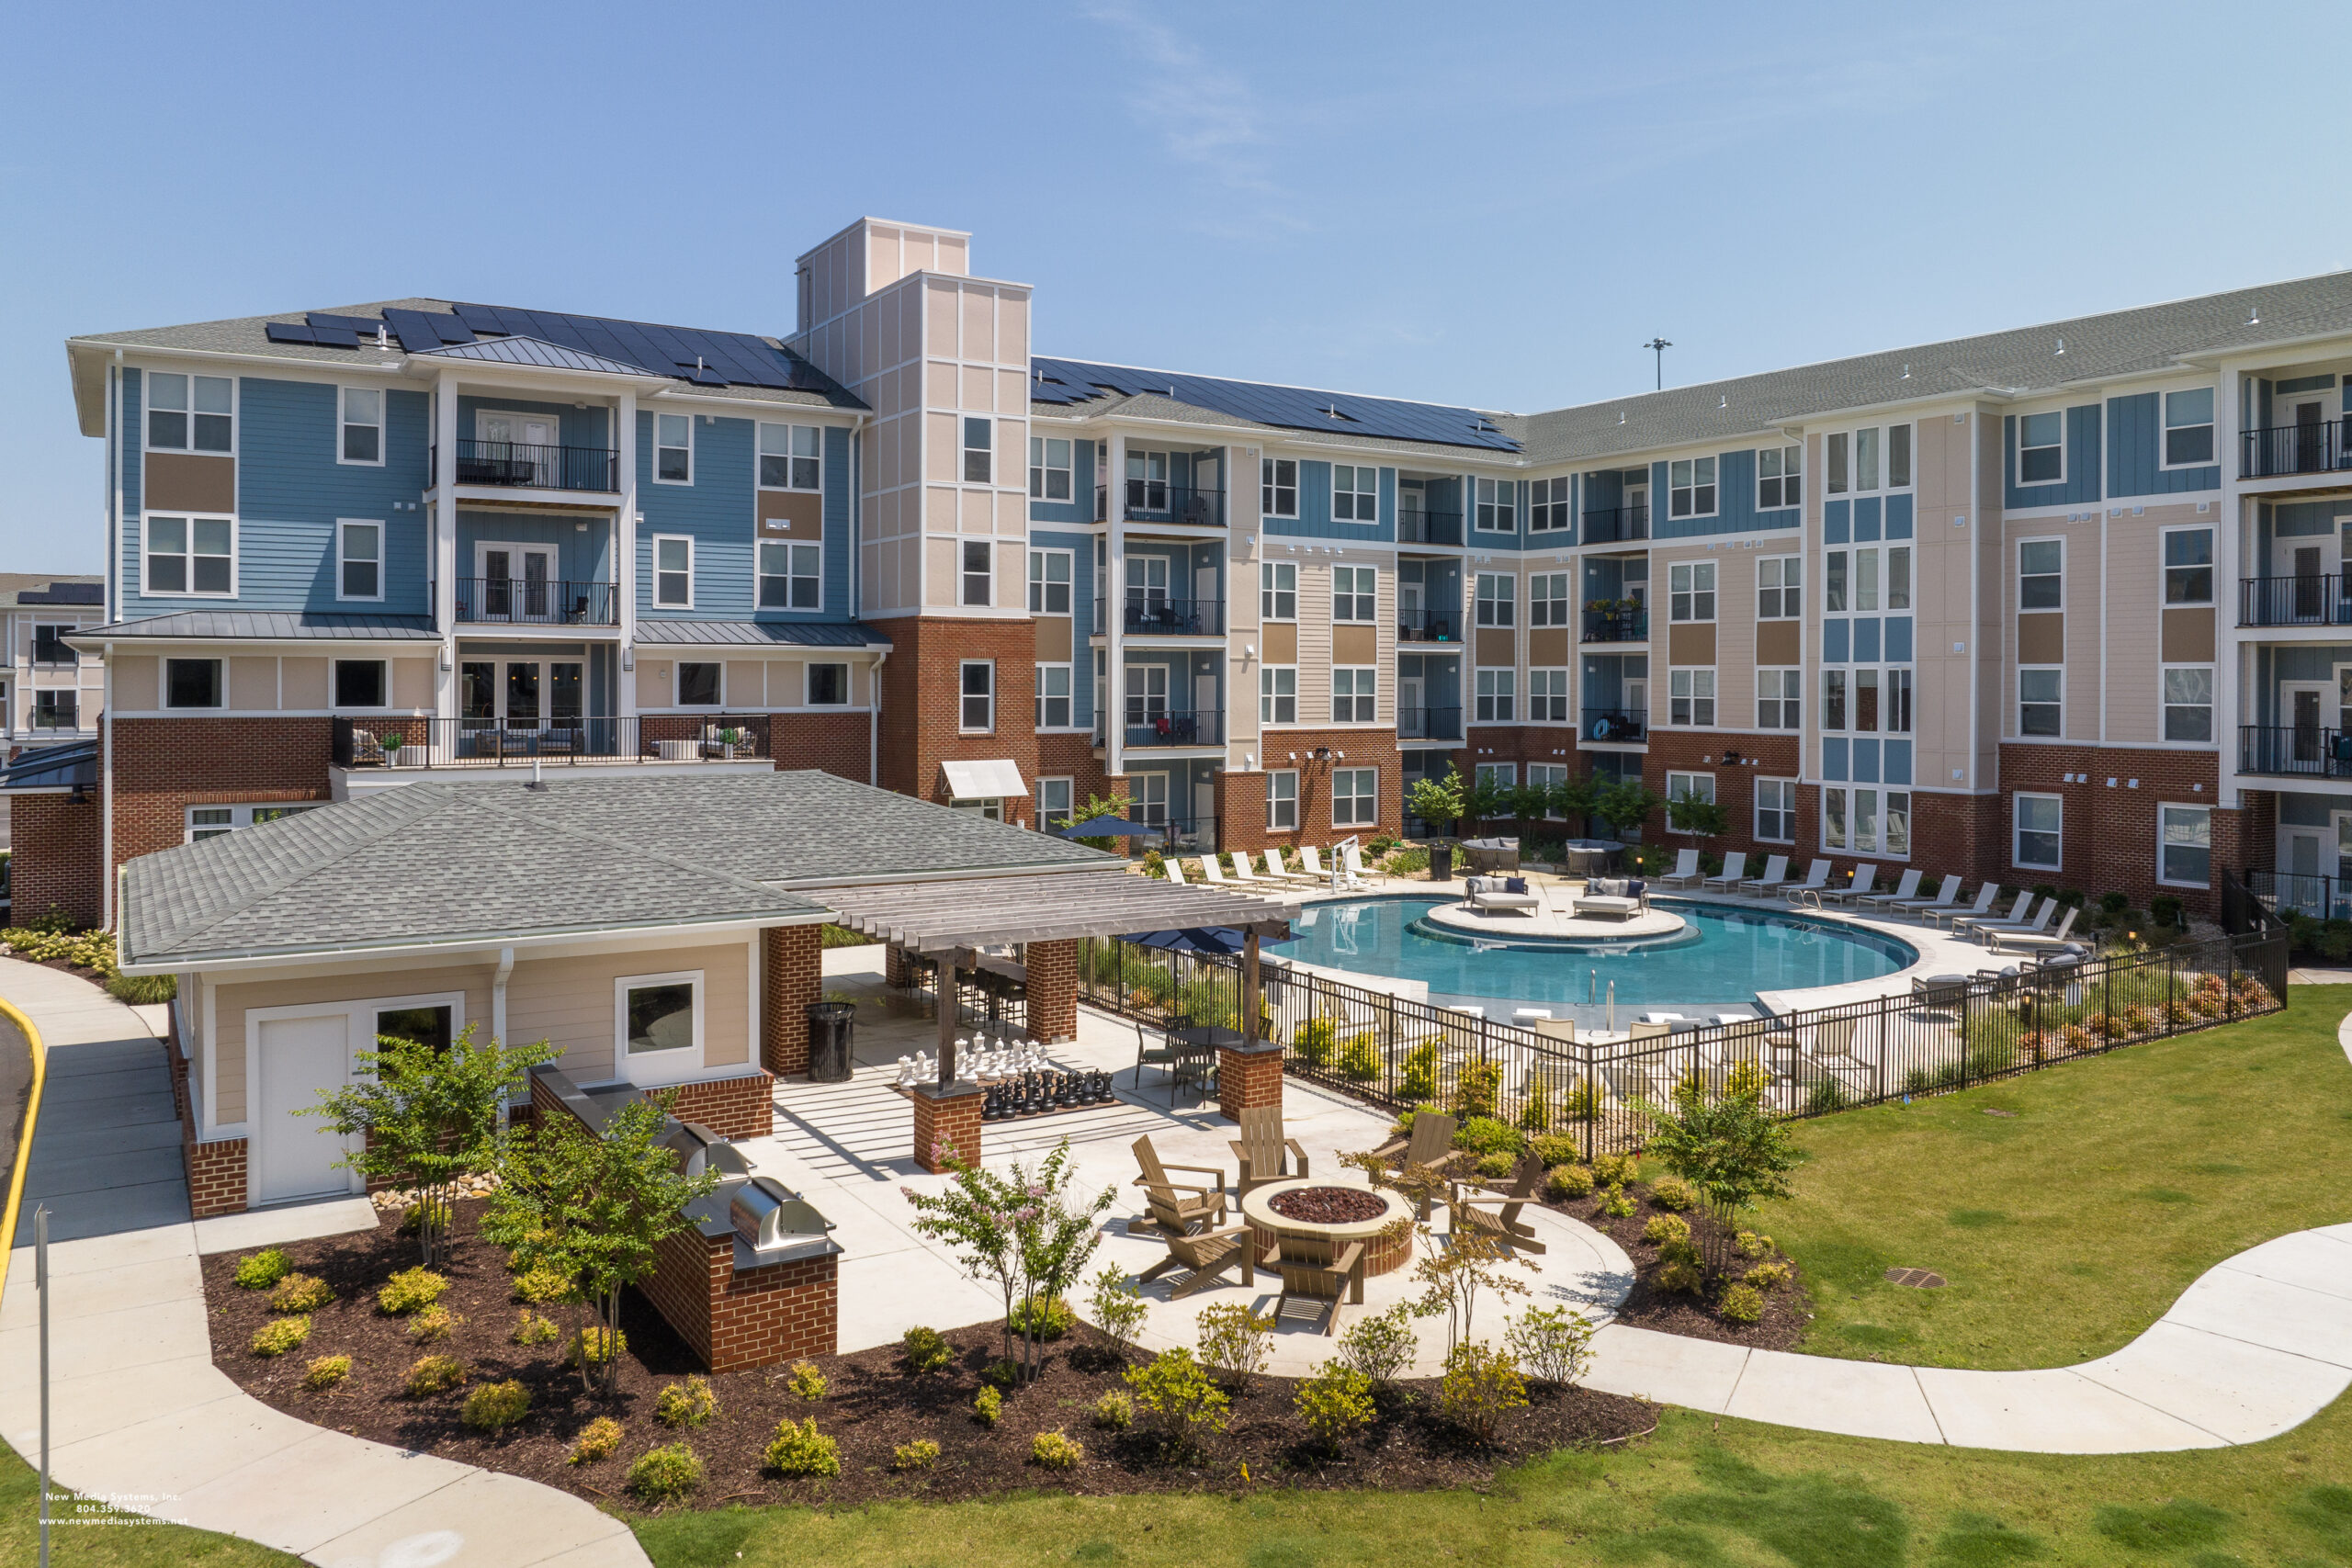 Pool and outer view of multifamily complex